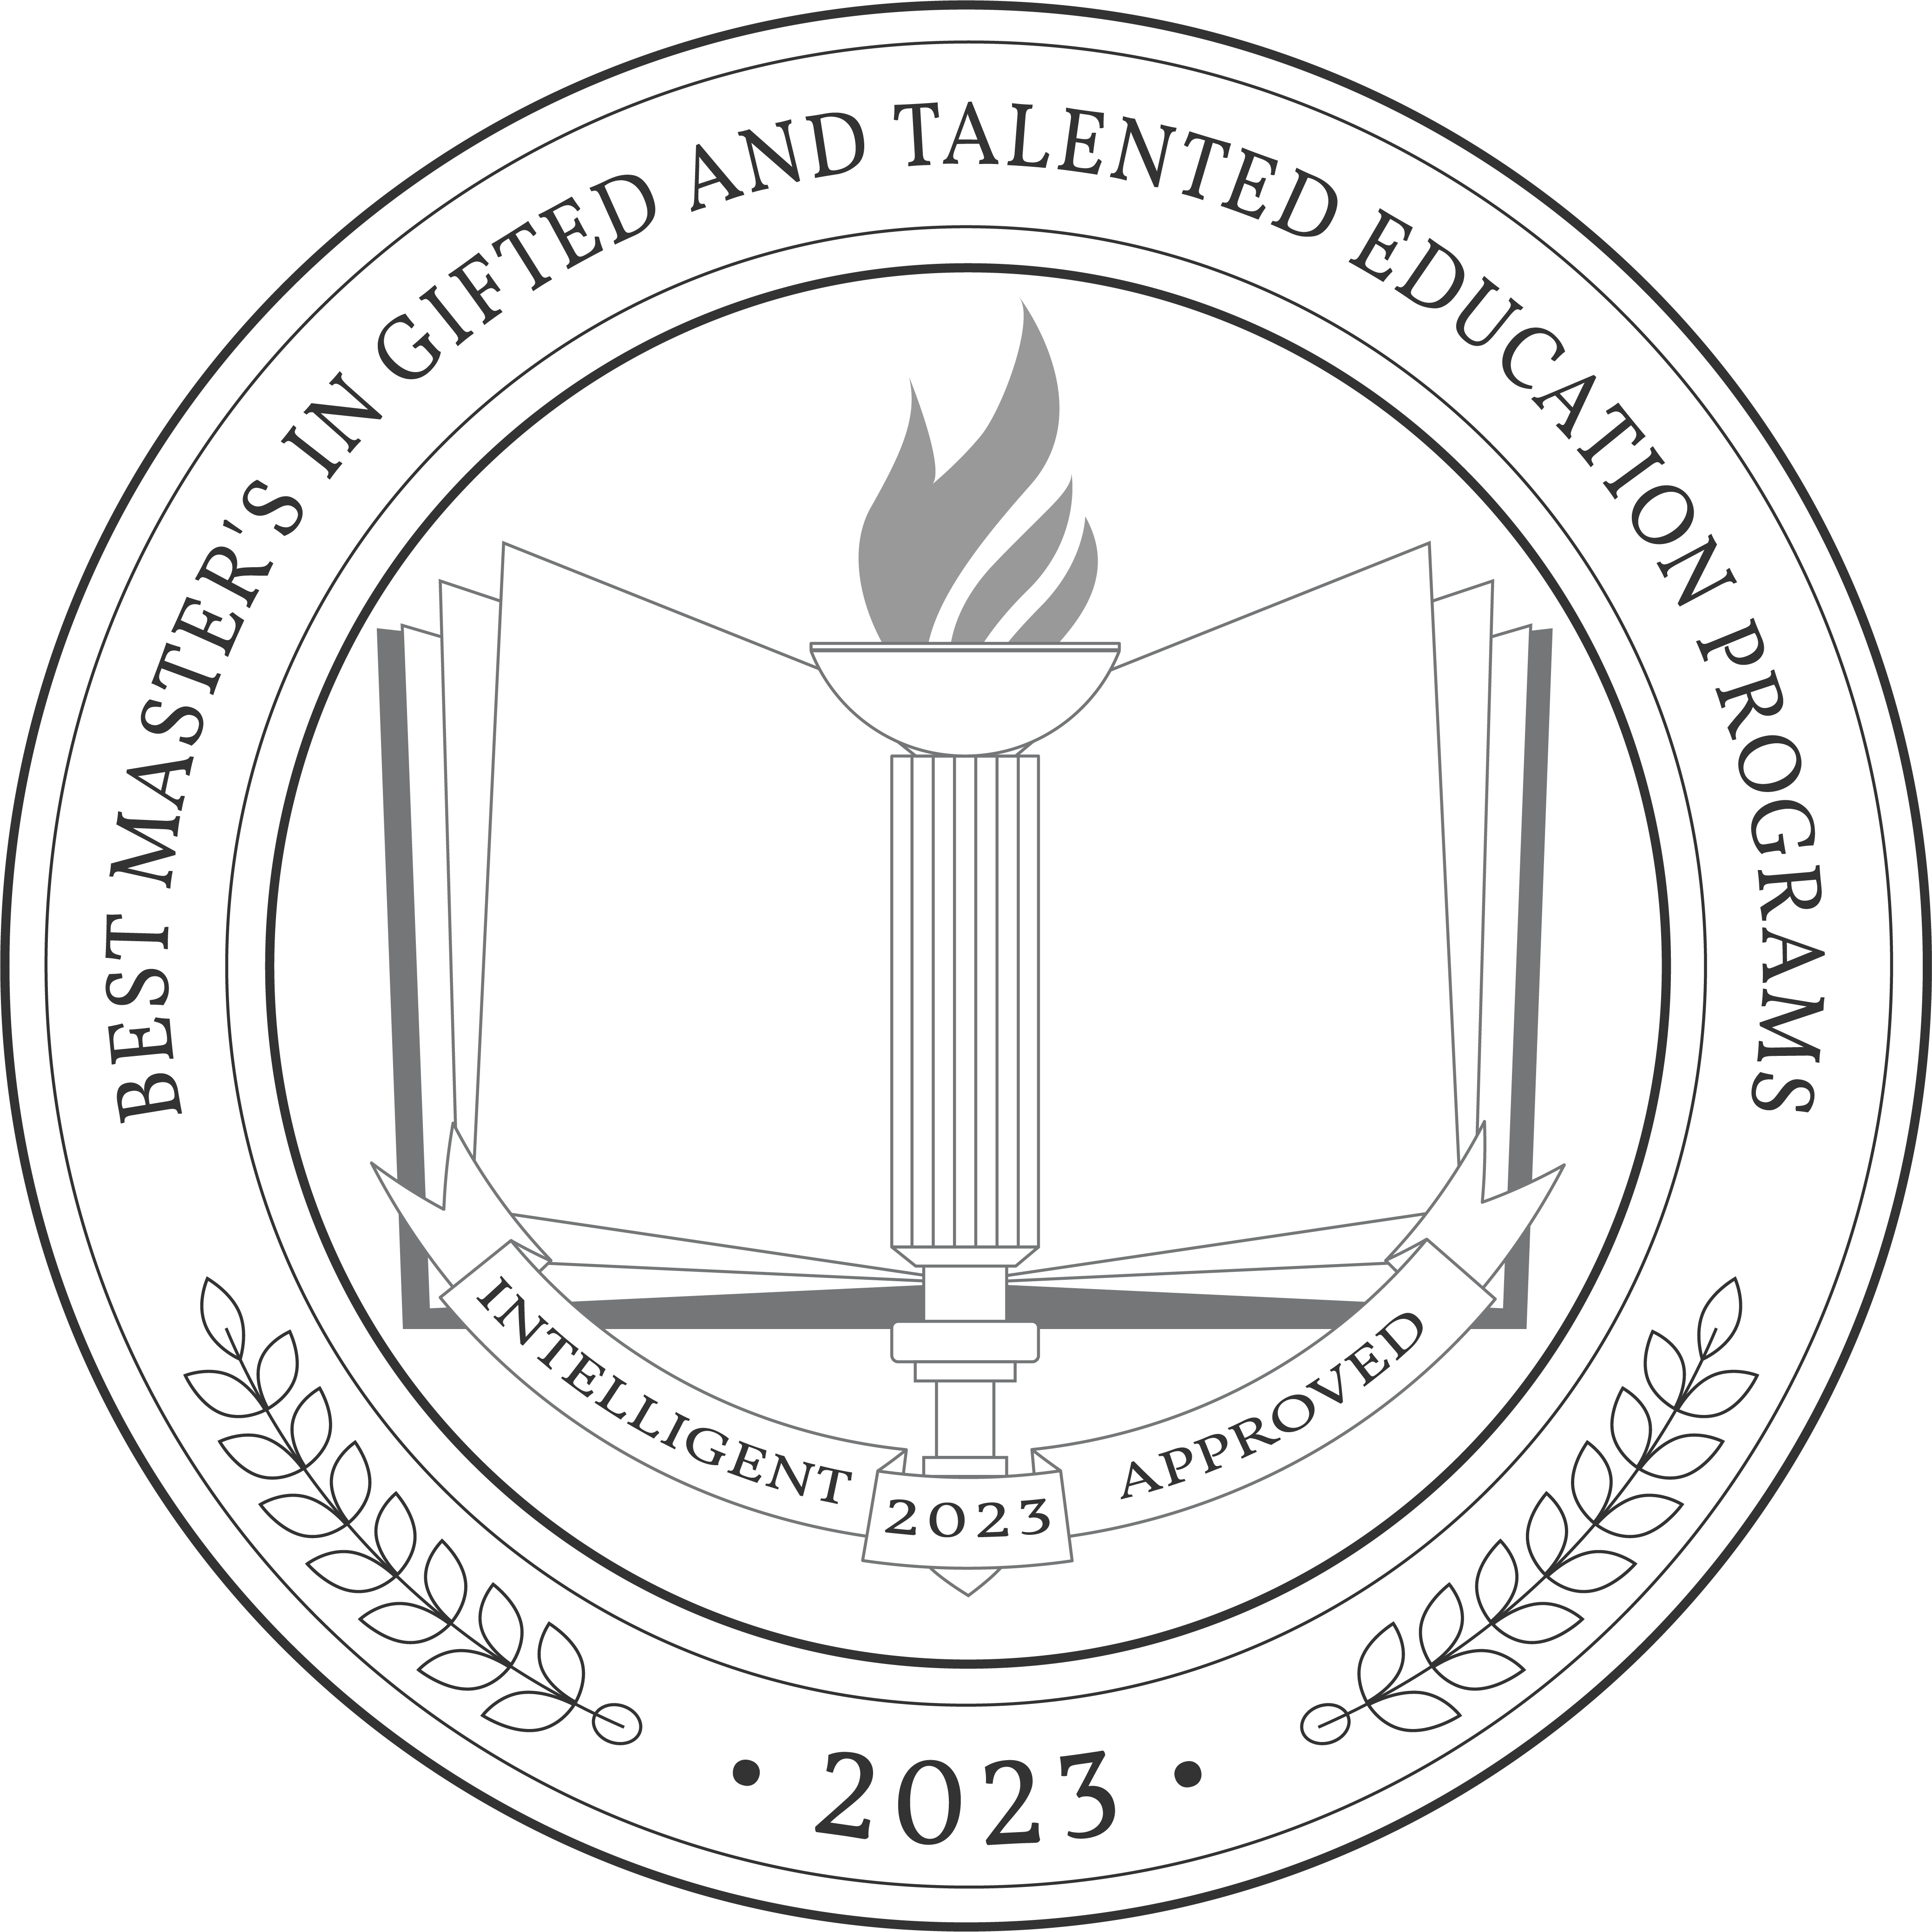 Best Master's in Gifted And Talented Education Programs badge